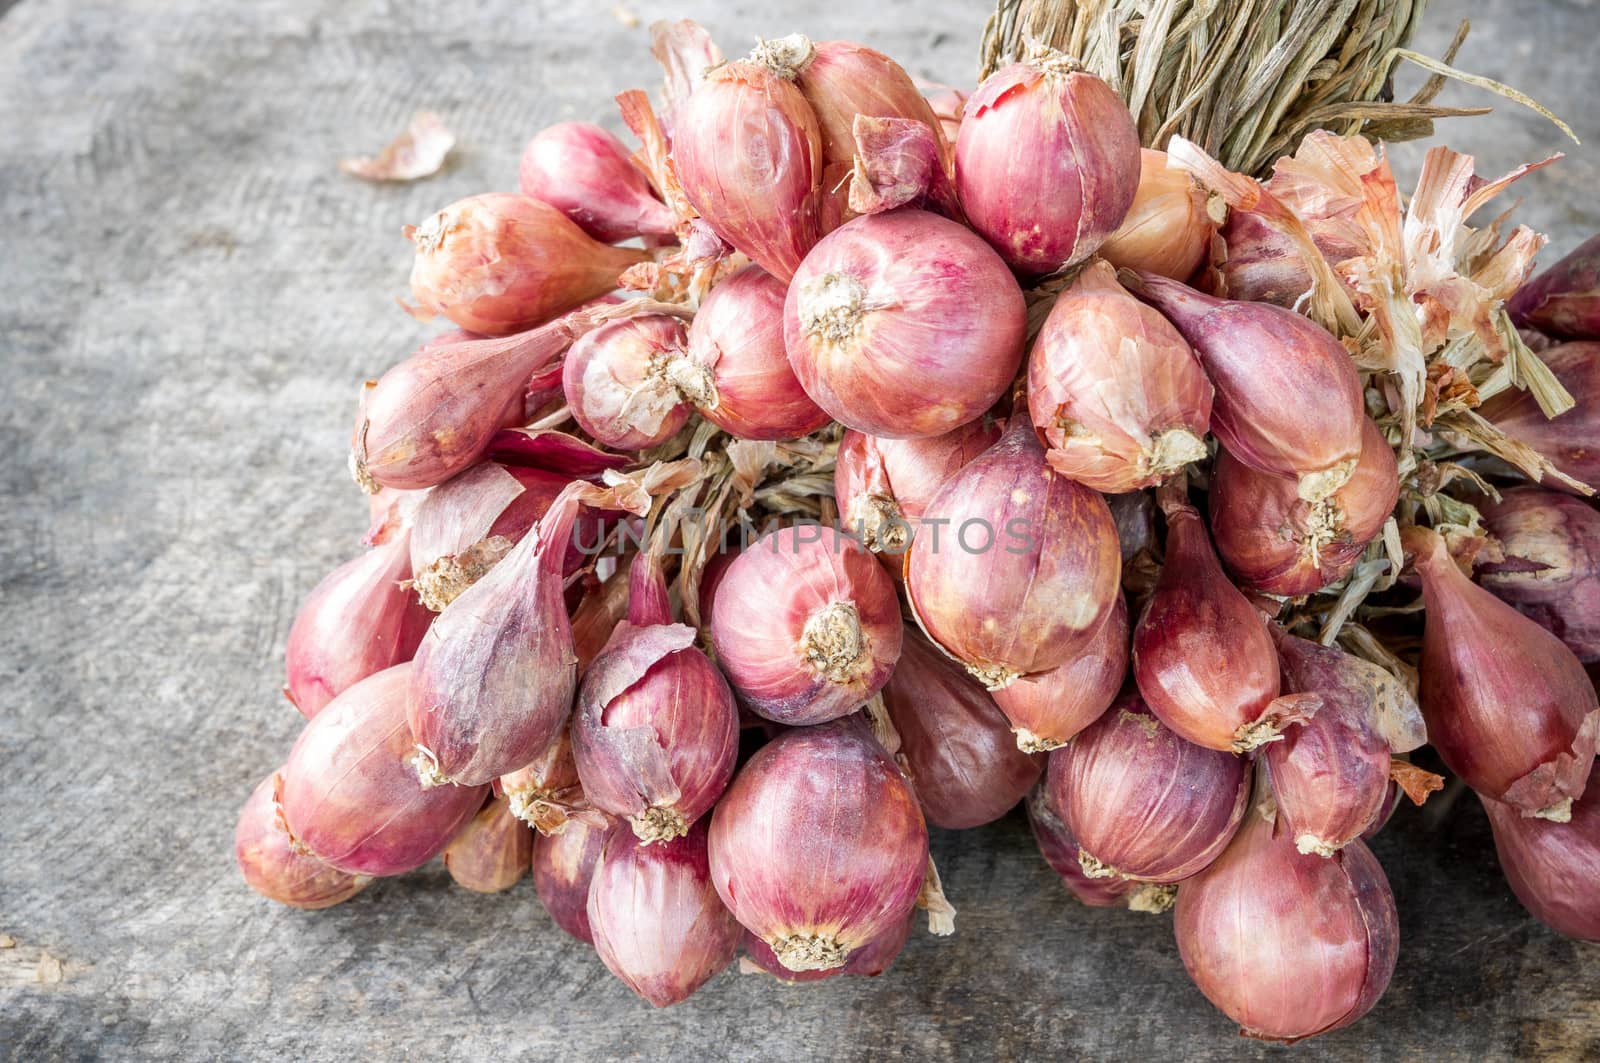 Many red onions on wooden background (Alliums, Alliaceae)